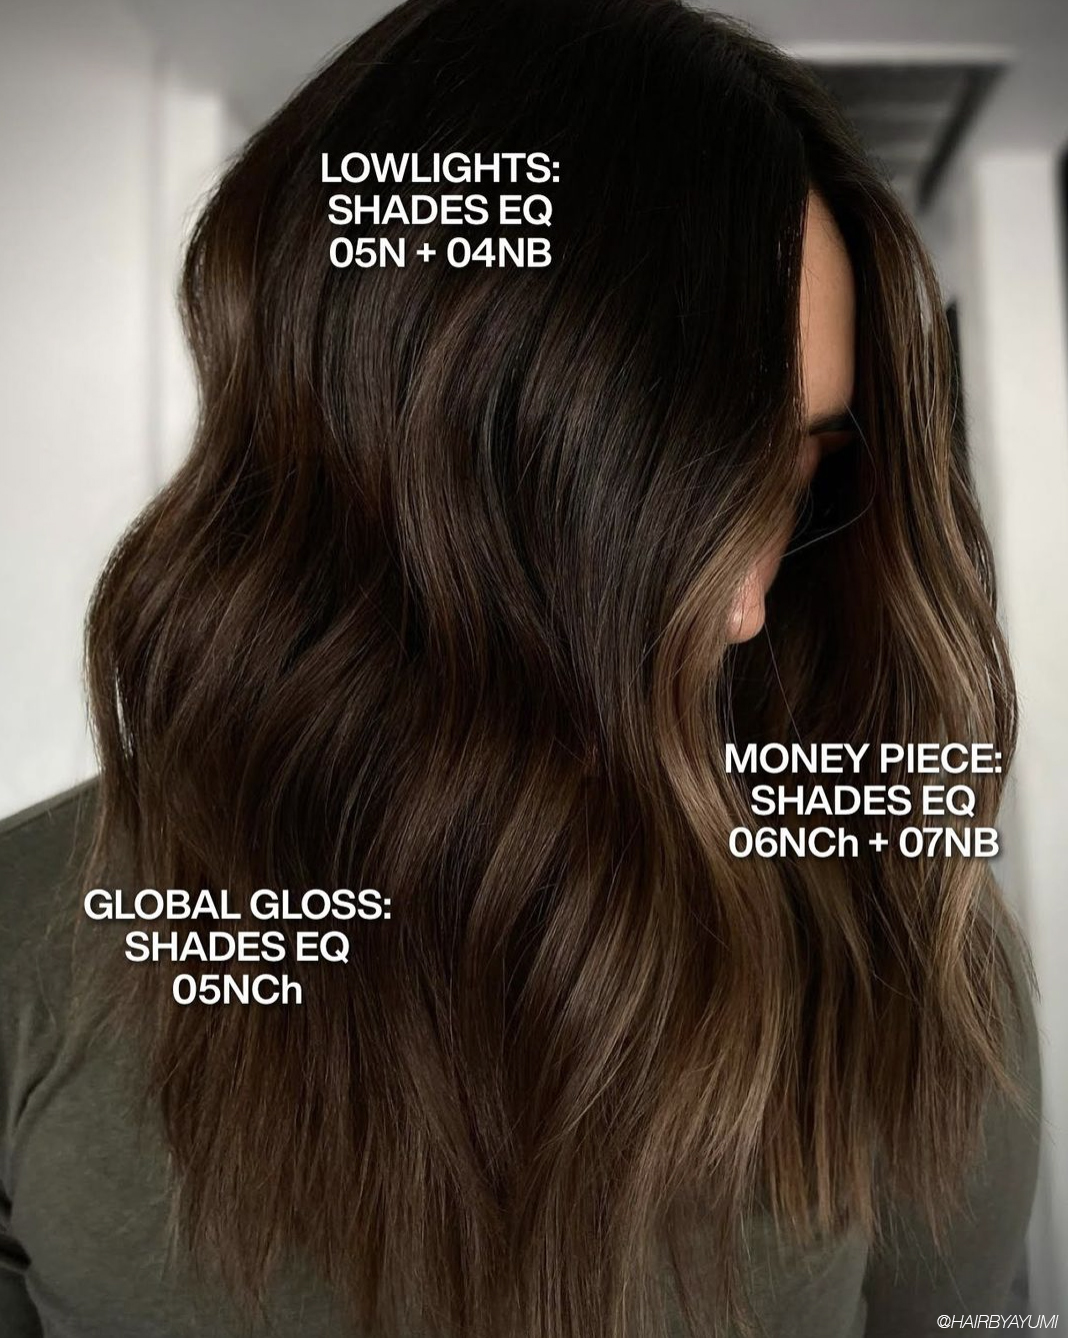 The Top Redken Shades EQ Toning Tips - Bangstyle - House of Hair Inspiration